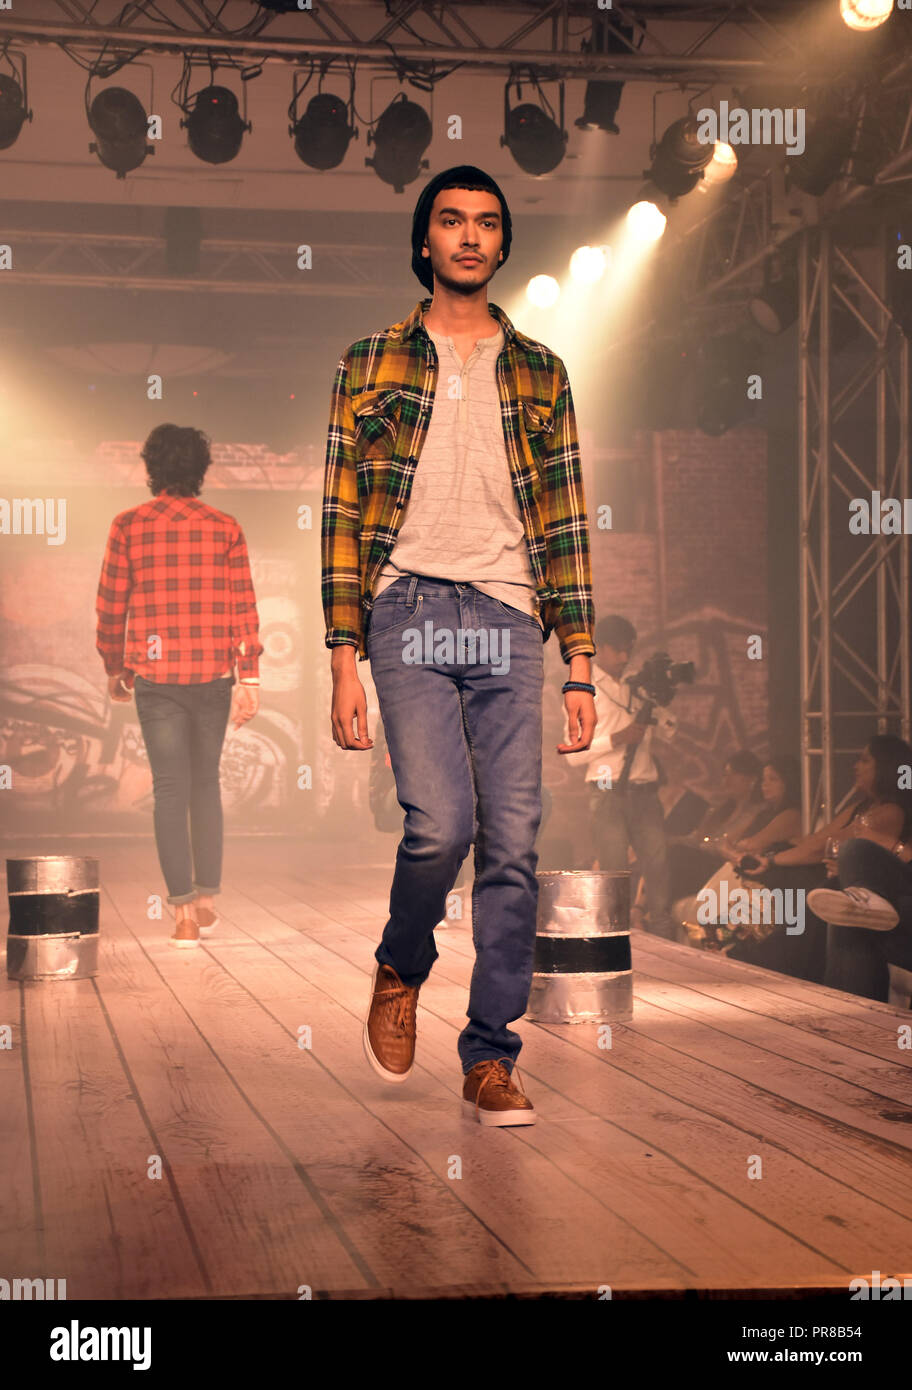 Mumbai, India. 29th Sep, 2018. A male model seen showcasing the new brand  during the launch.Mufti a clothing brand launches a new Autumn Winter'18  collection at ITC Maratha hotel in Mumbai. Credit